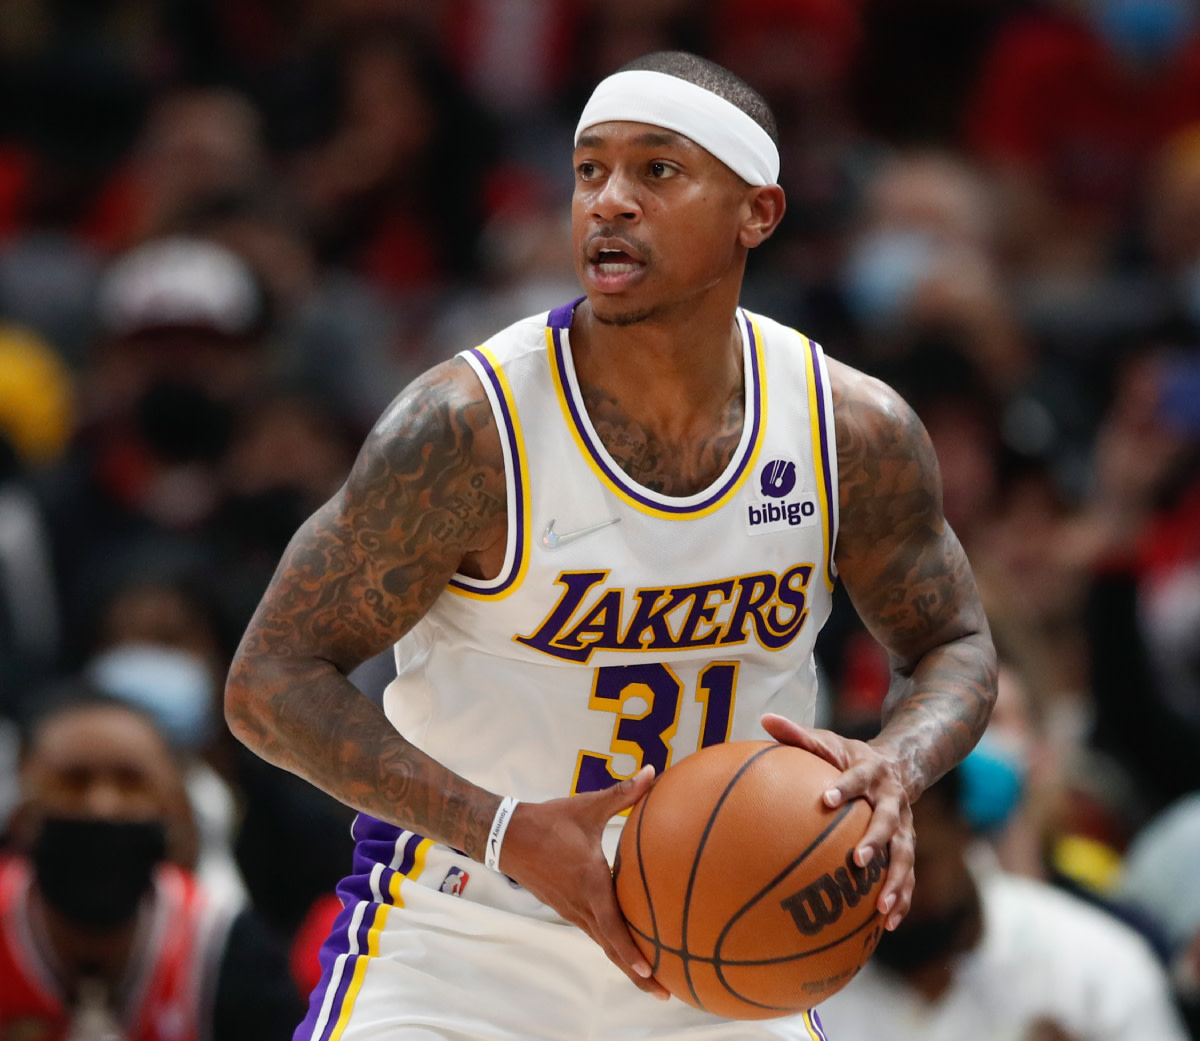 Isaiah Thomas Calls Out An NBA Insider For Saying He Worked Out With The Lakers: "What Source Told You That? Smh."